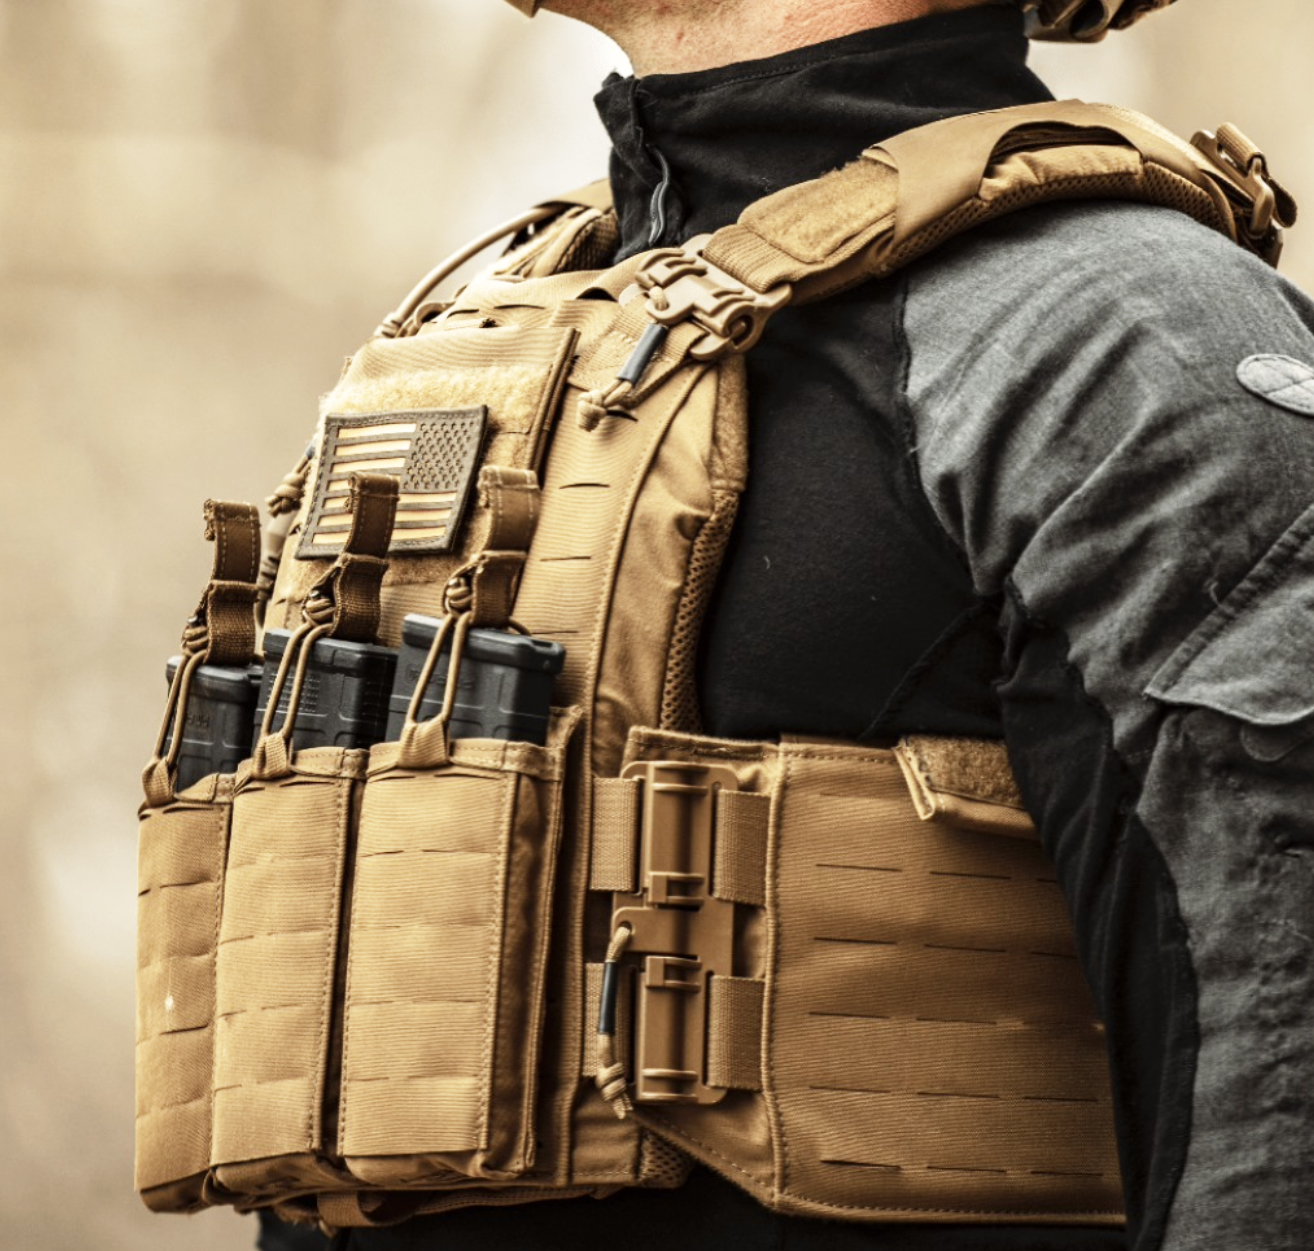 The Strandhogg plate carrier